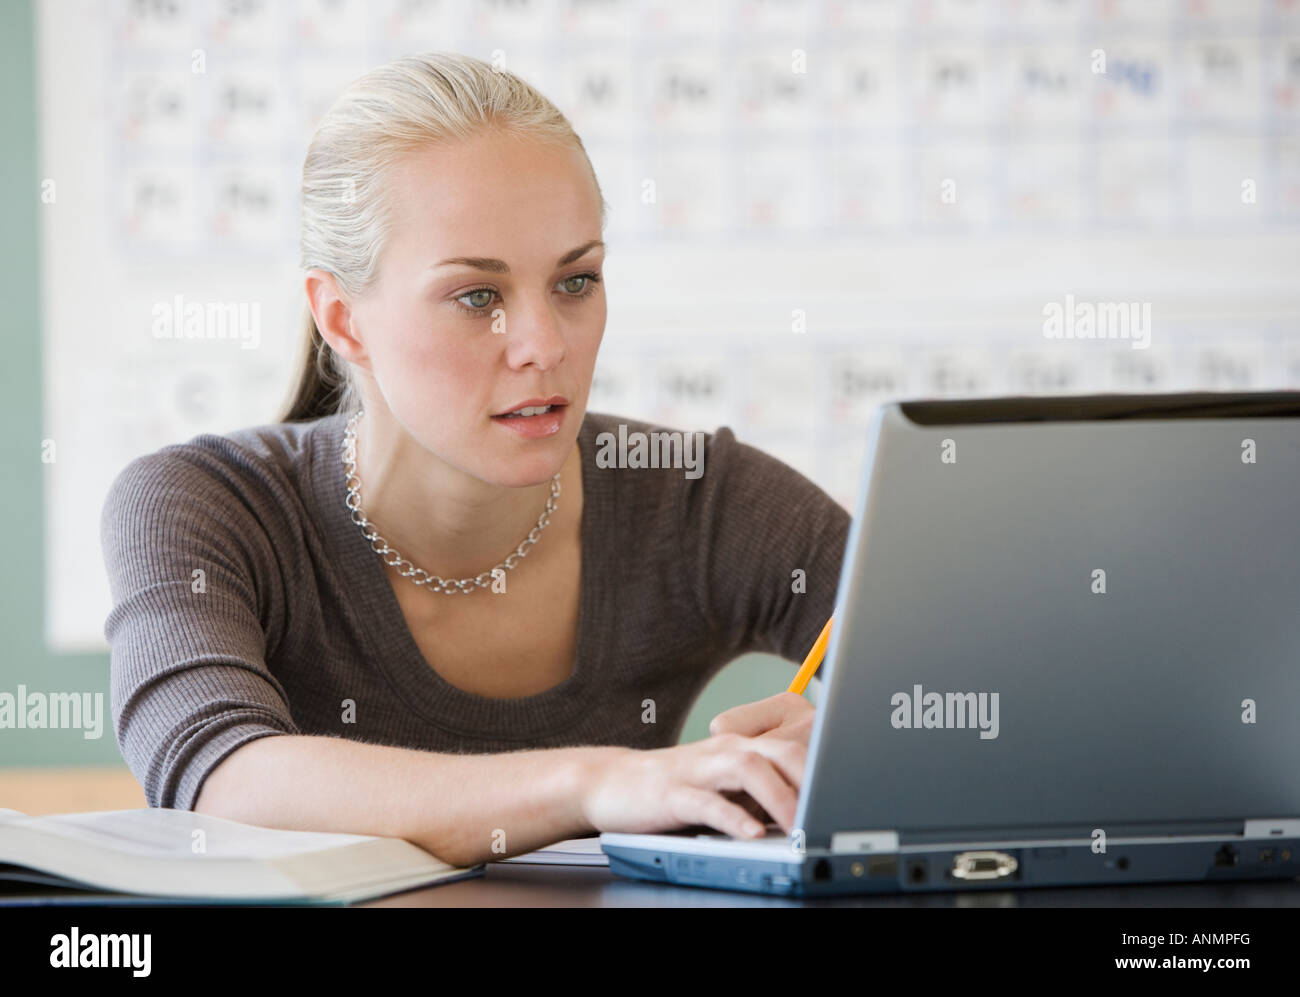 Female college student typing on laptop Banque D'Images